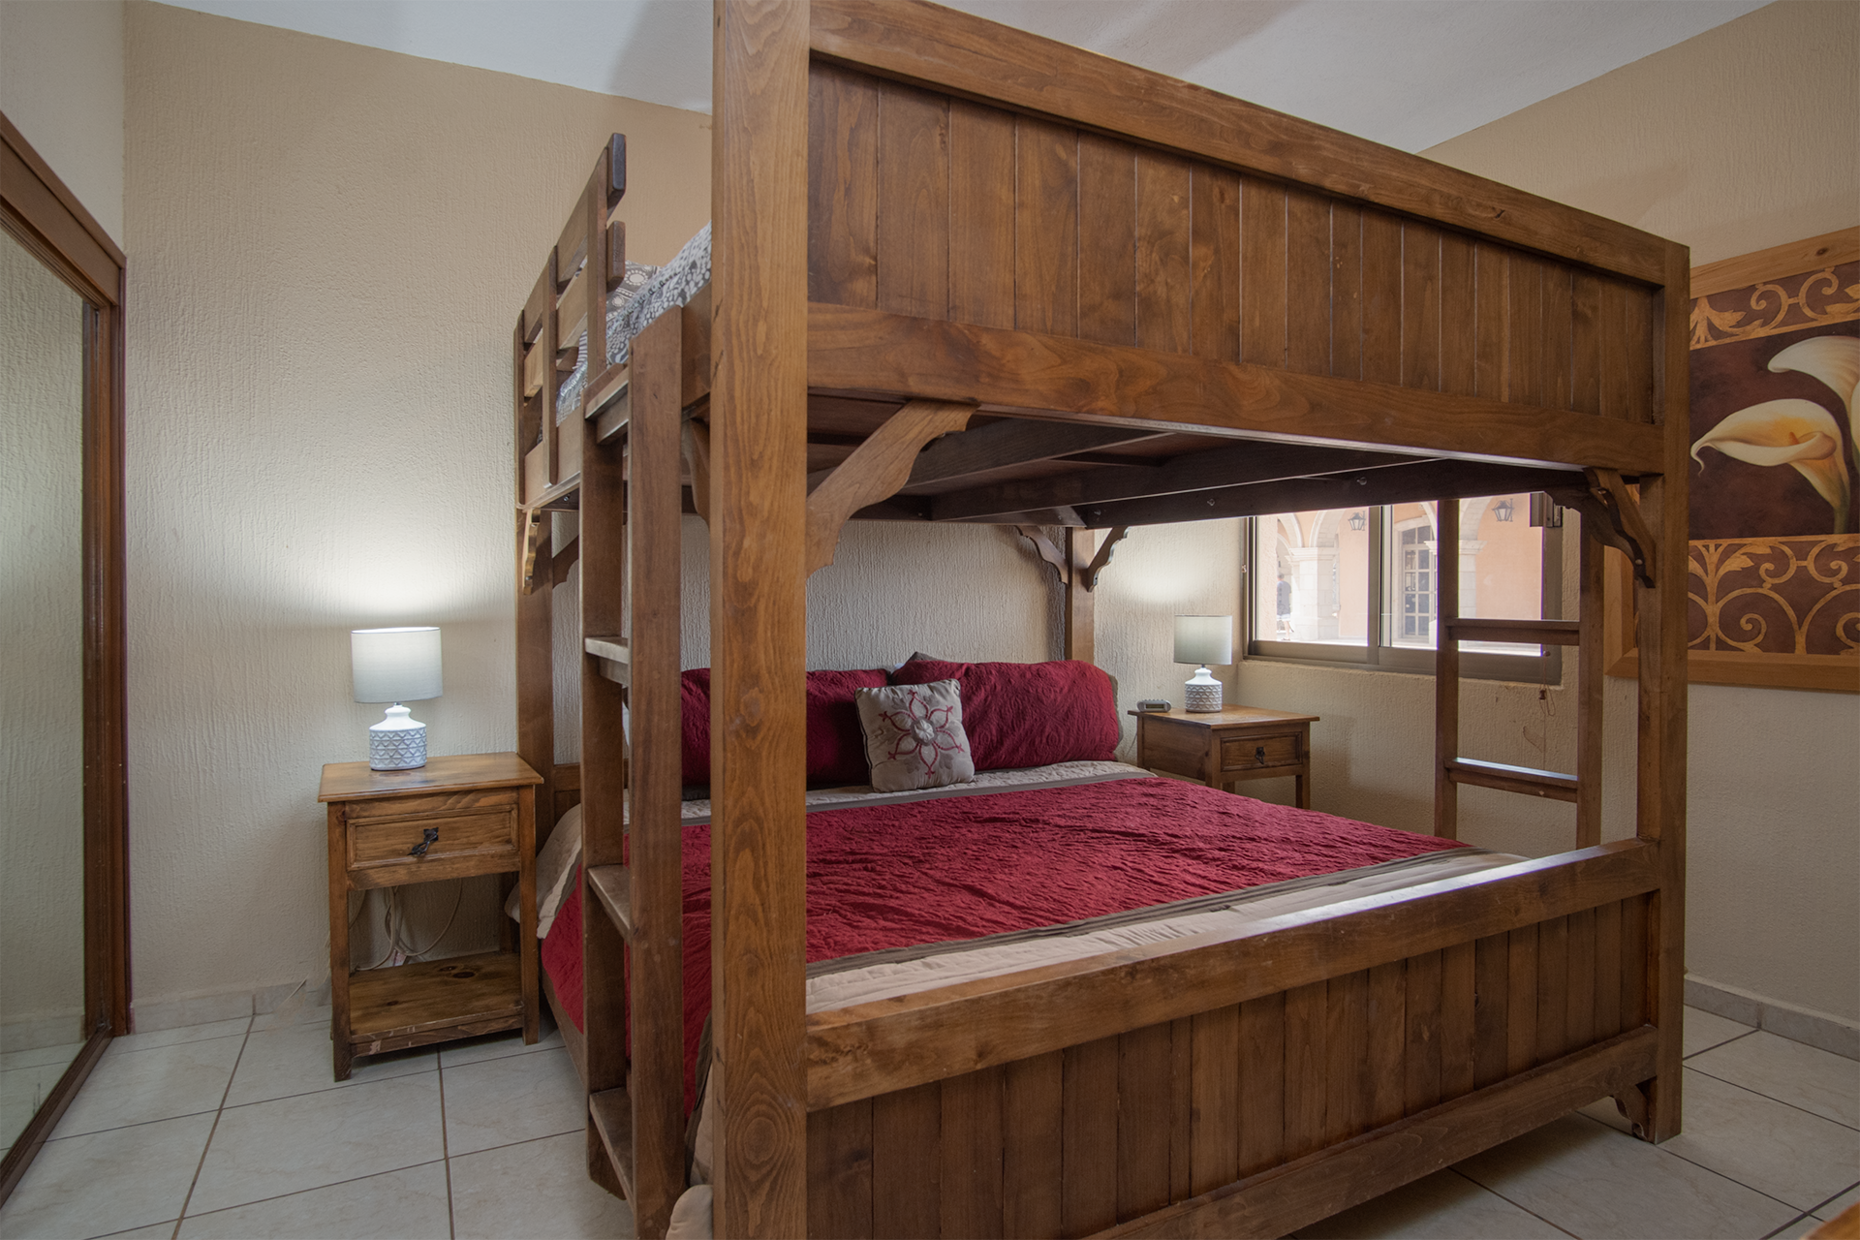 bunk beds are large in the first bedroom